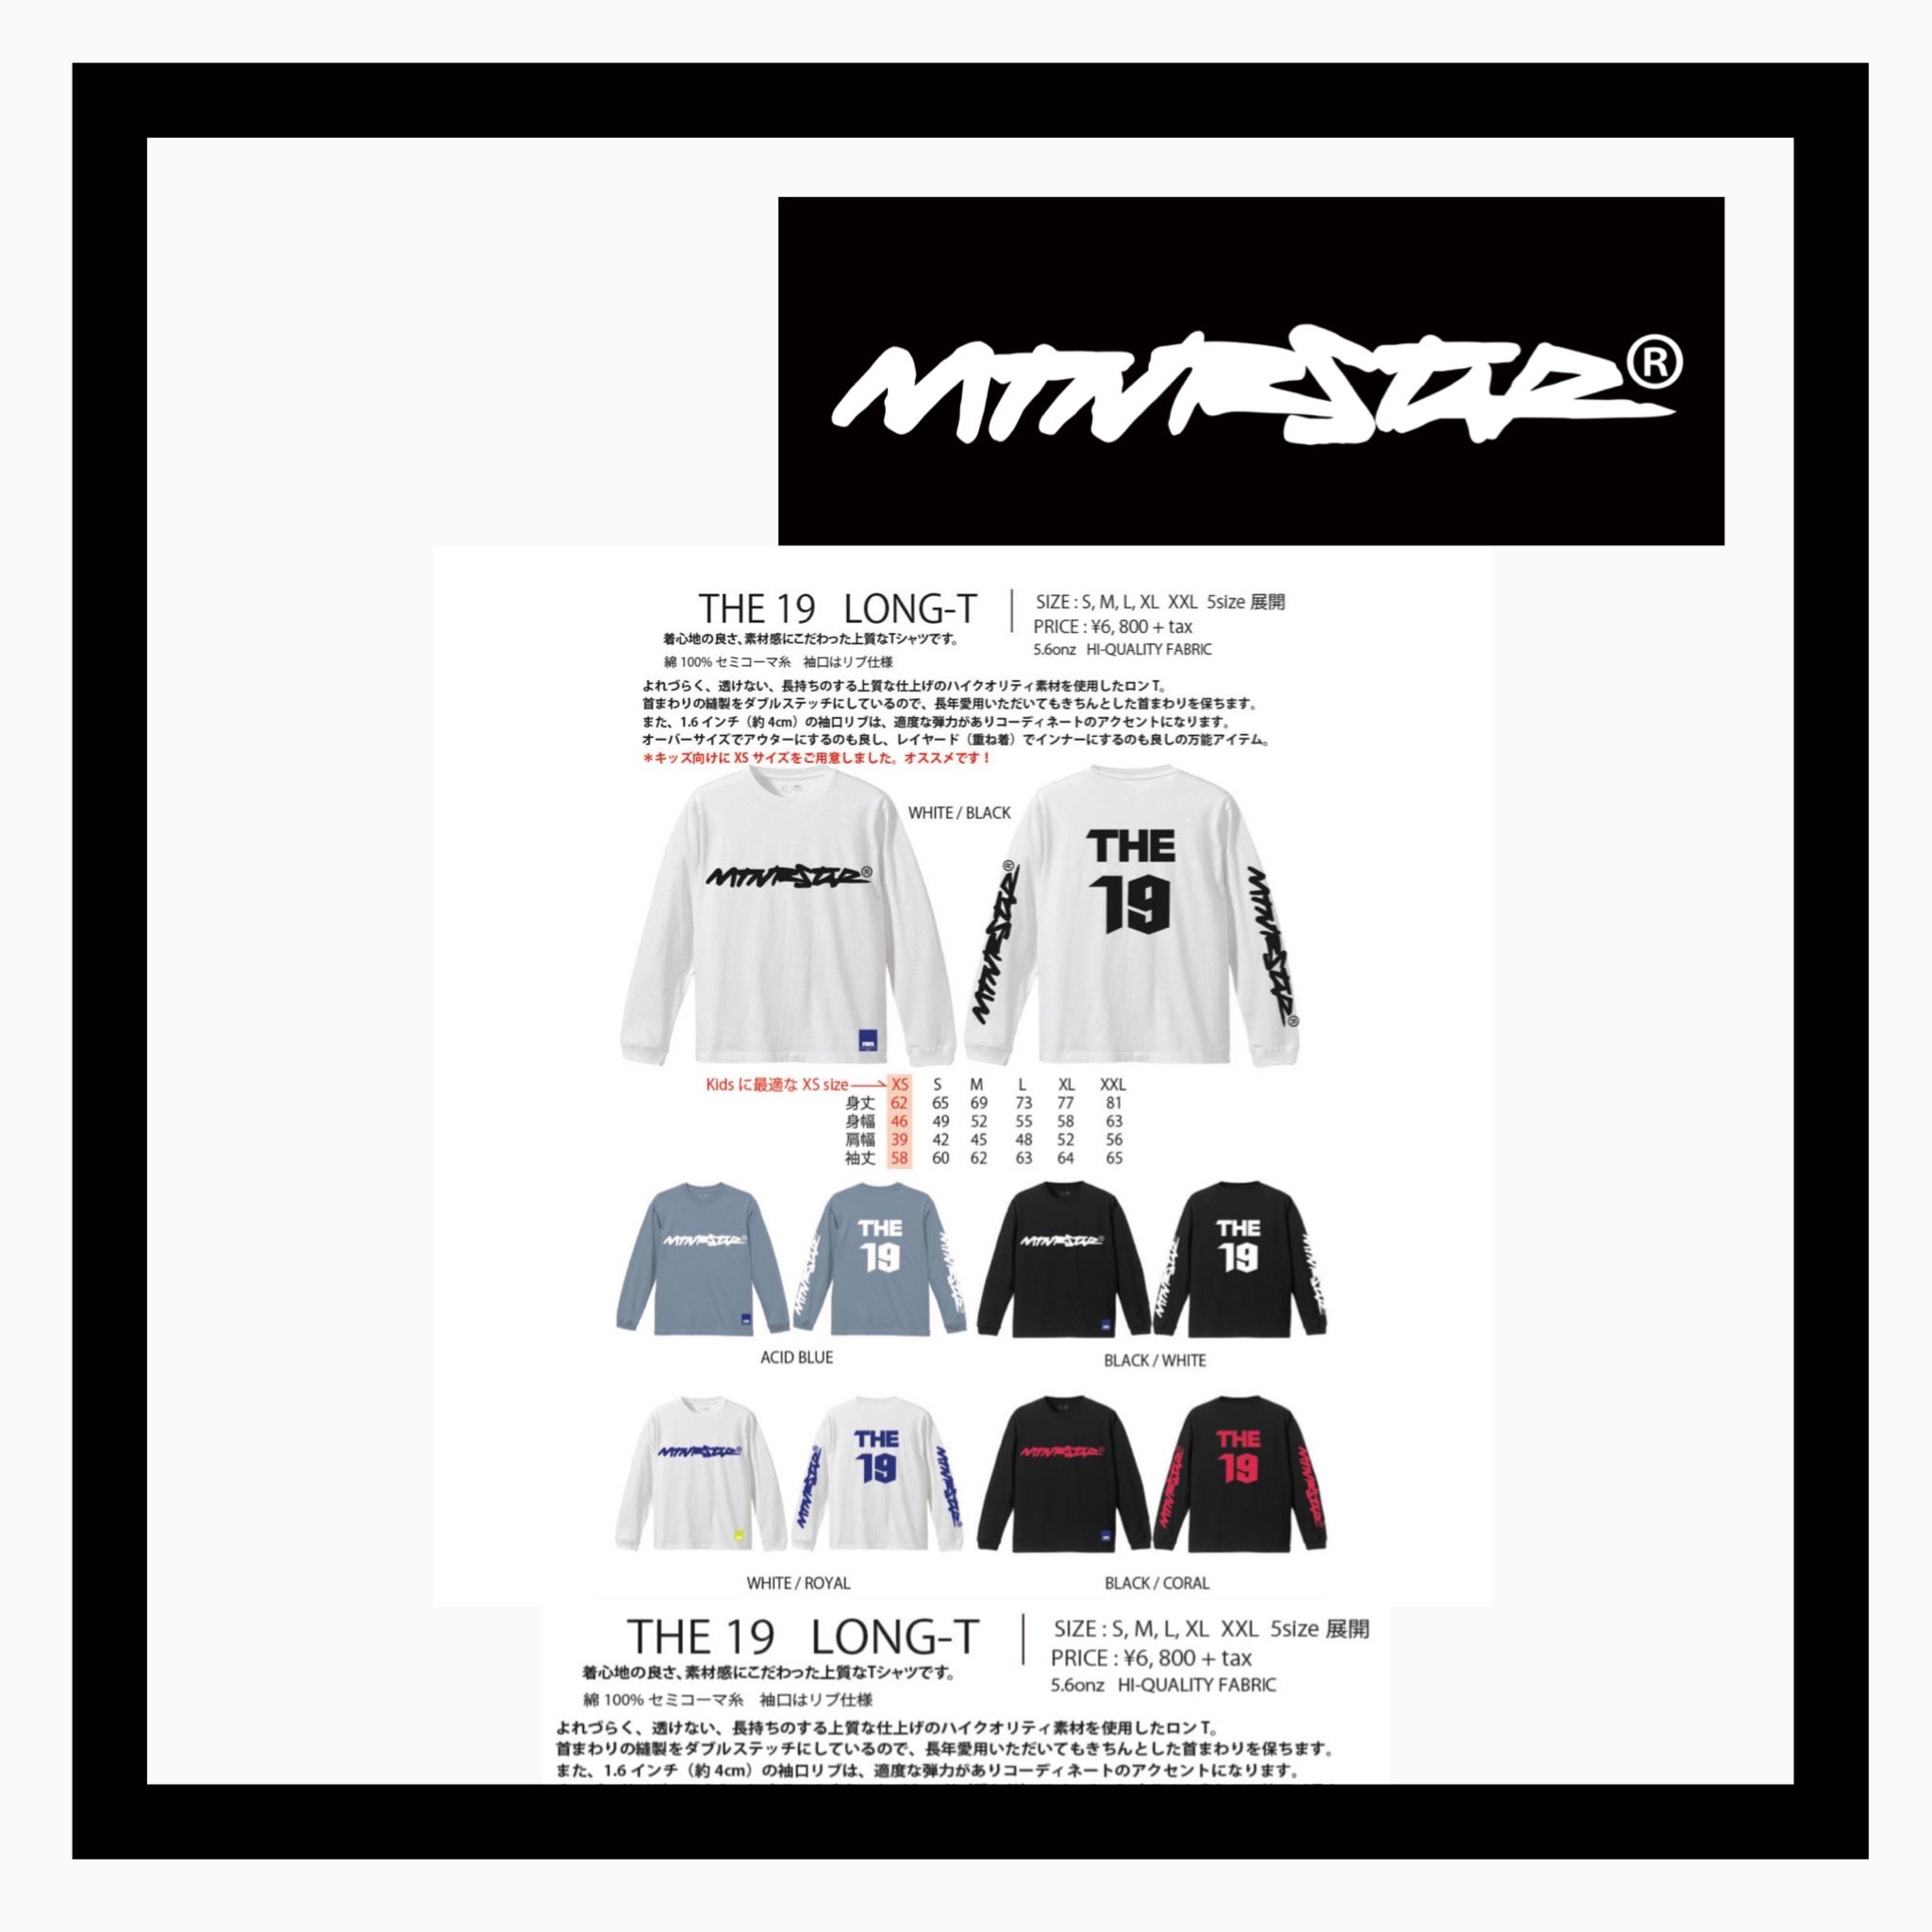 <img class='new_mark_img1' src='https://img.shop-pro.jp/img/new/icons14.gif' style='border:none;display:inline;margin:0px;padding:0px;width:auto;' />MOUNTAIN ROCK STAR Summer Apparel THE 19 LONG-T